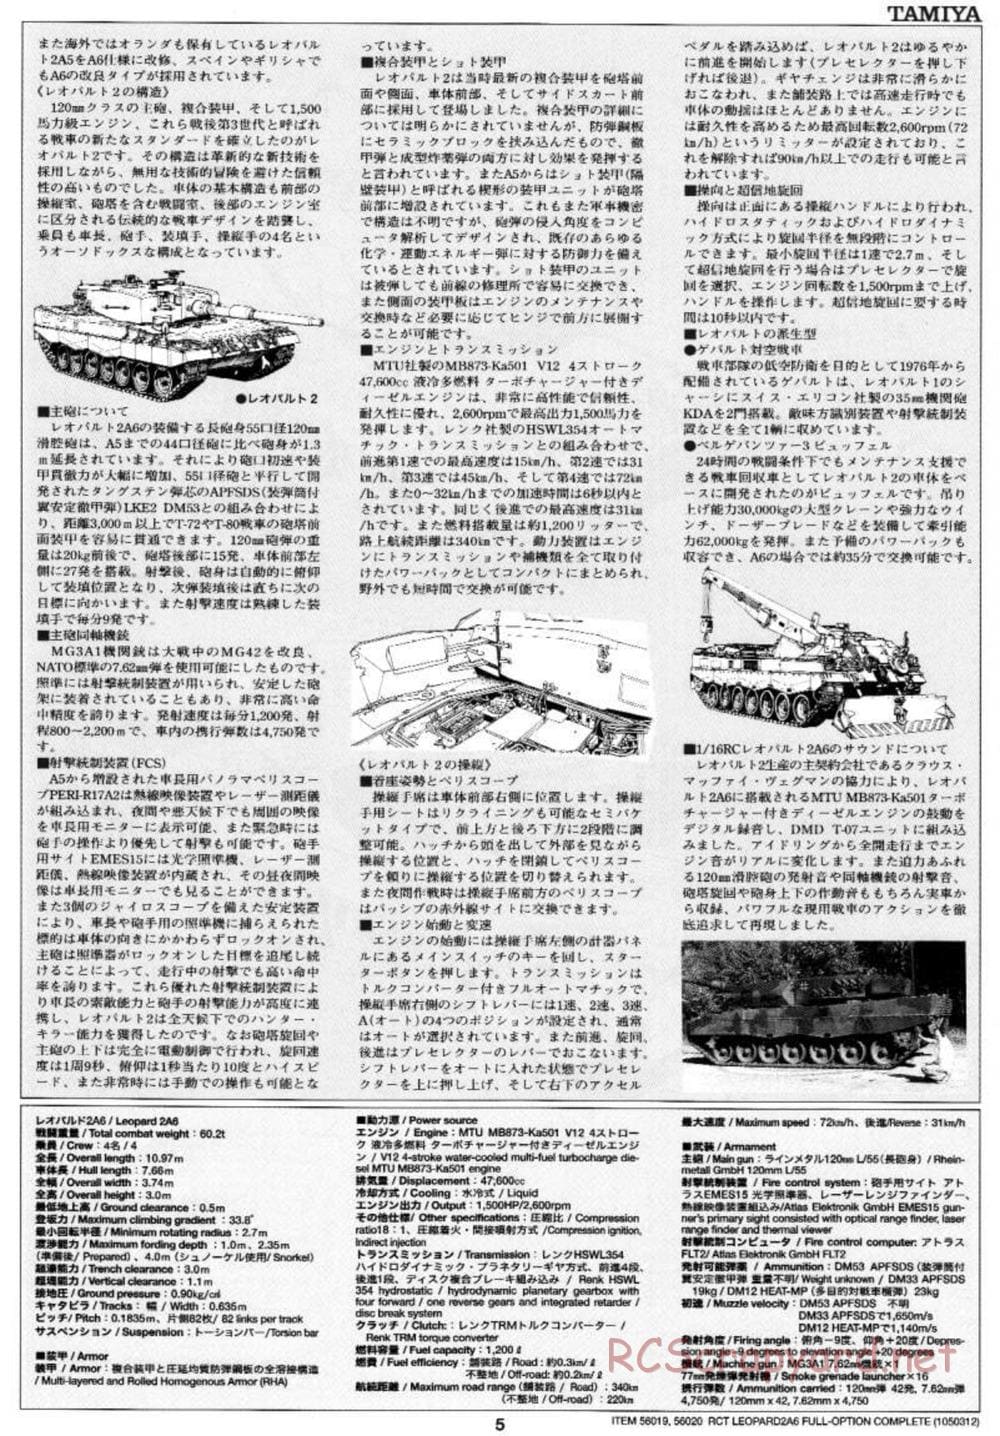 Tamiya - Leopard 2 A6 - 1/16 Scale Chassis - Manual - Page 5